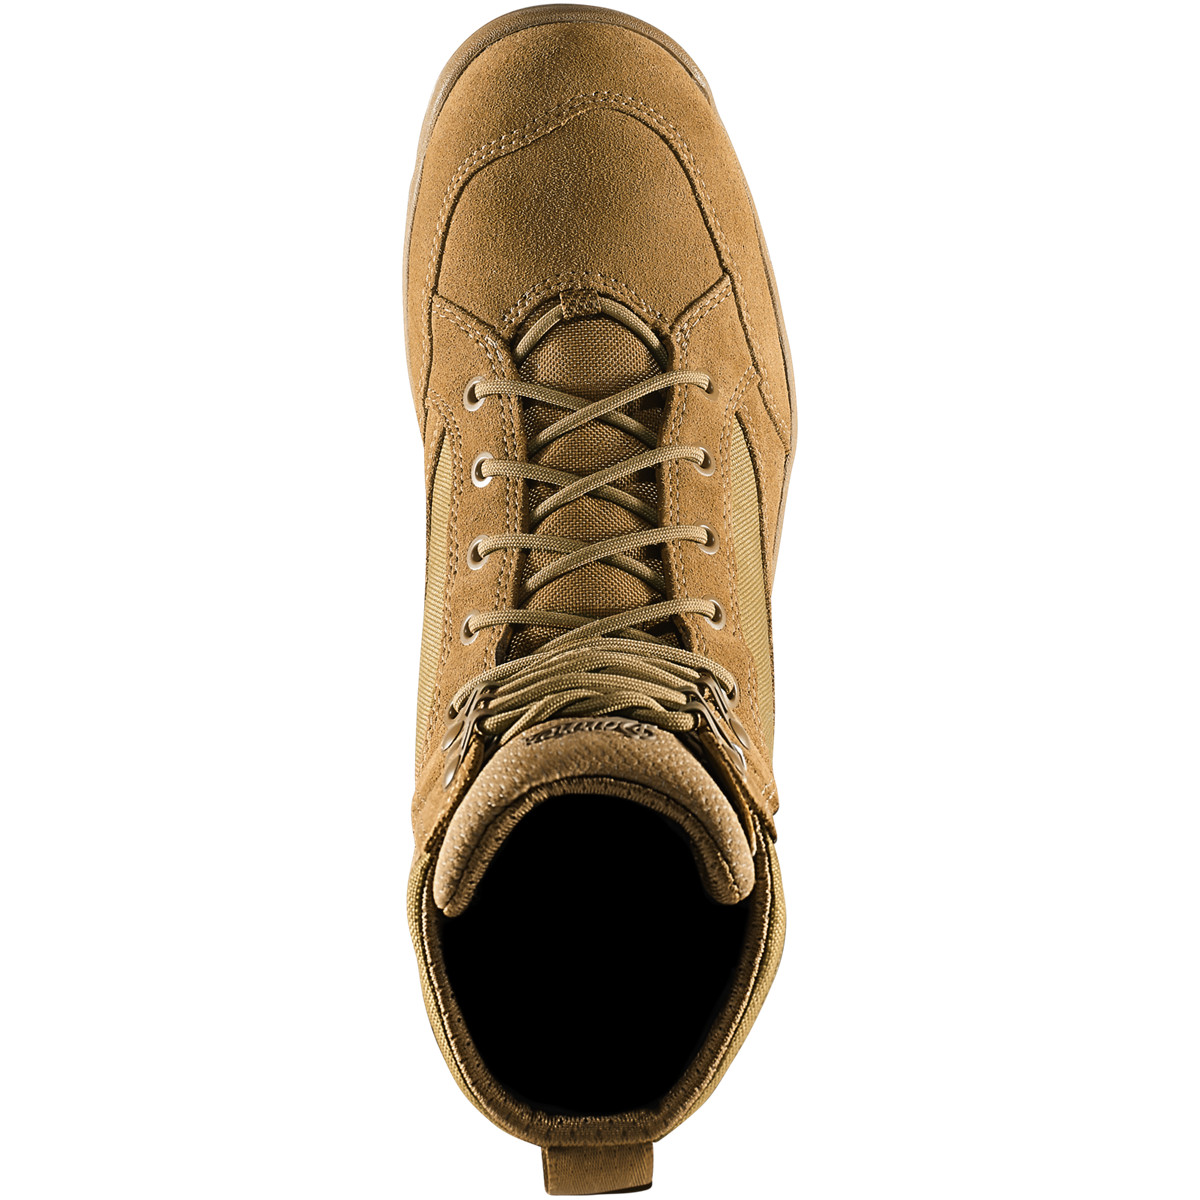 Details about   Danner Men's 55317 Tanicus 8" Coyote Dry AR-670-1 Military Tactical Shoes Boots